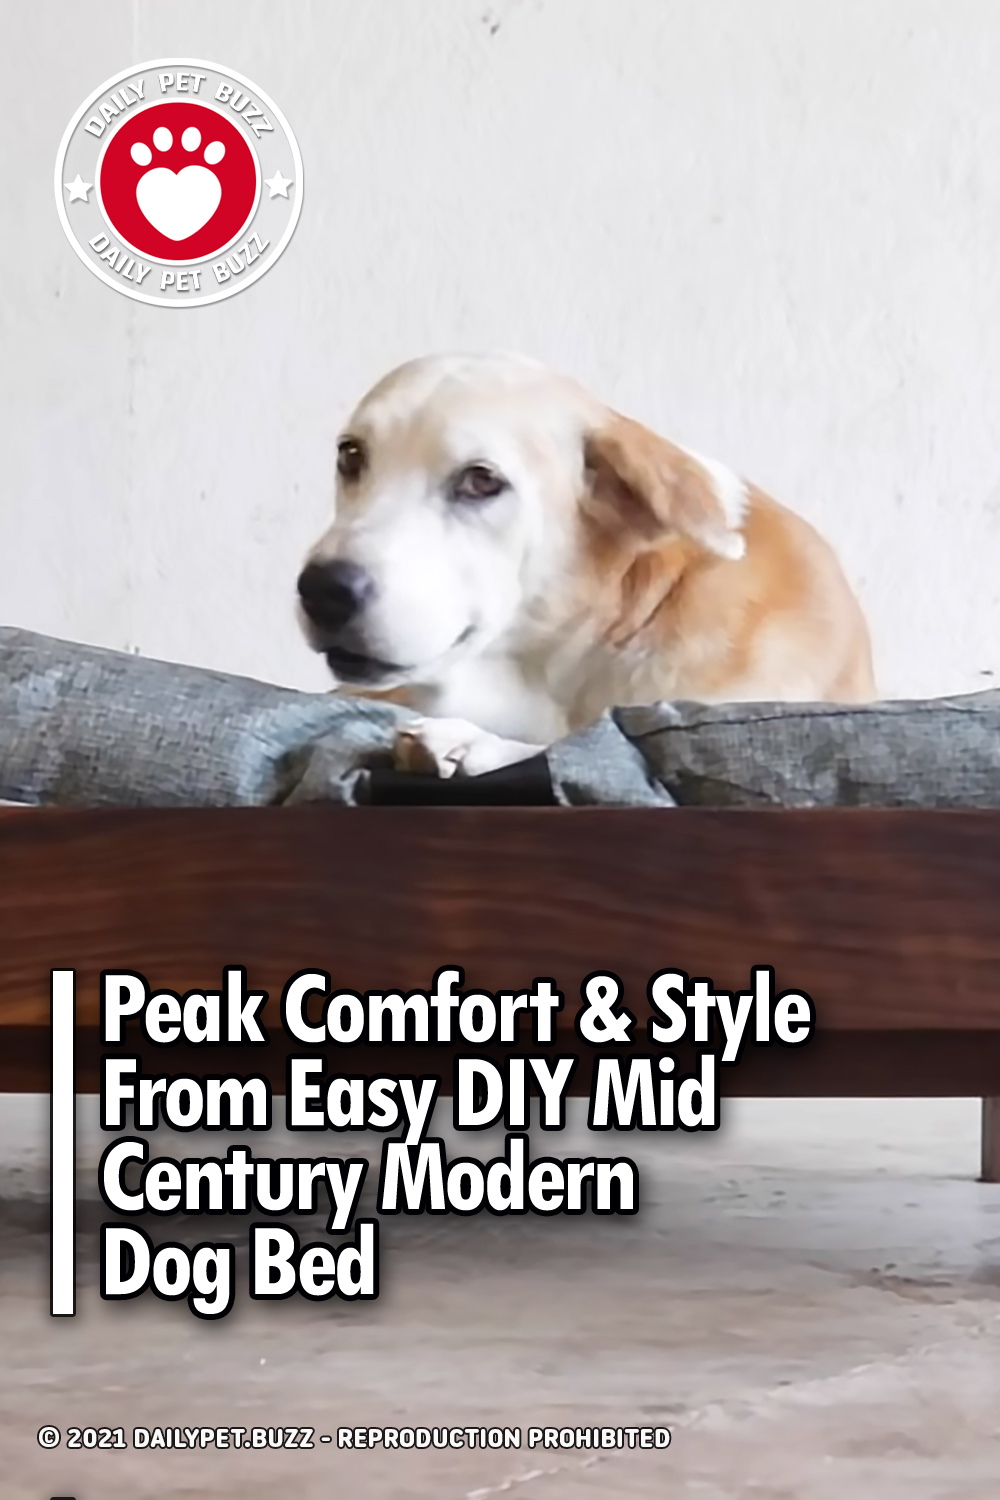 Peak Comfort & Style From Easy DIY Mid Century Modern Dog Bed